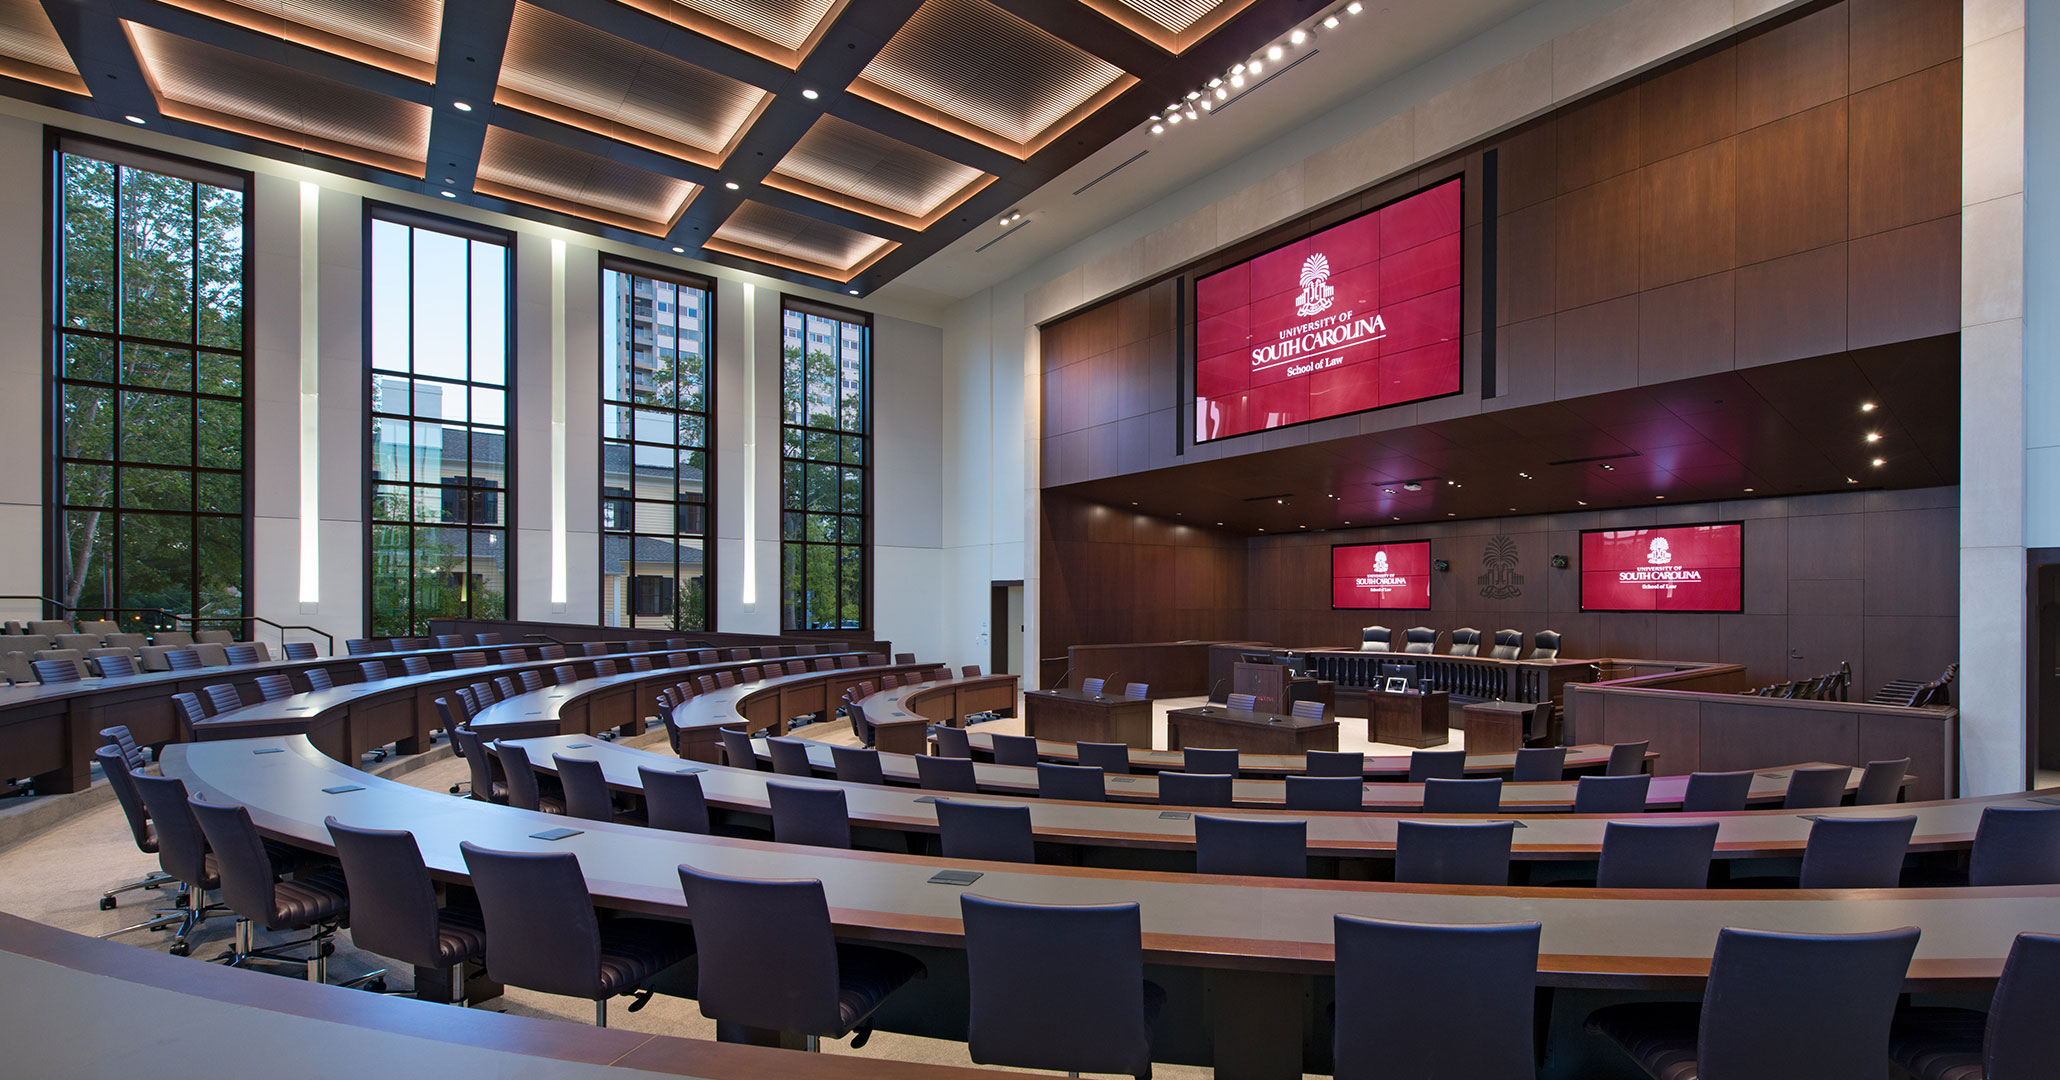 The University of South Carolina worked with Boudreaux architects to design classrooms for the new Law School.